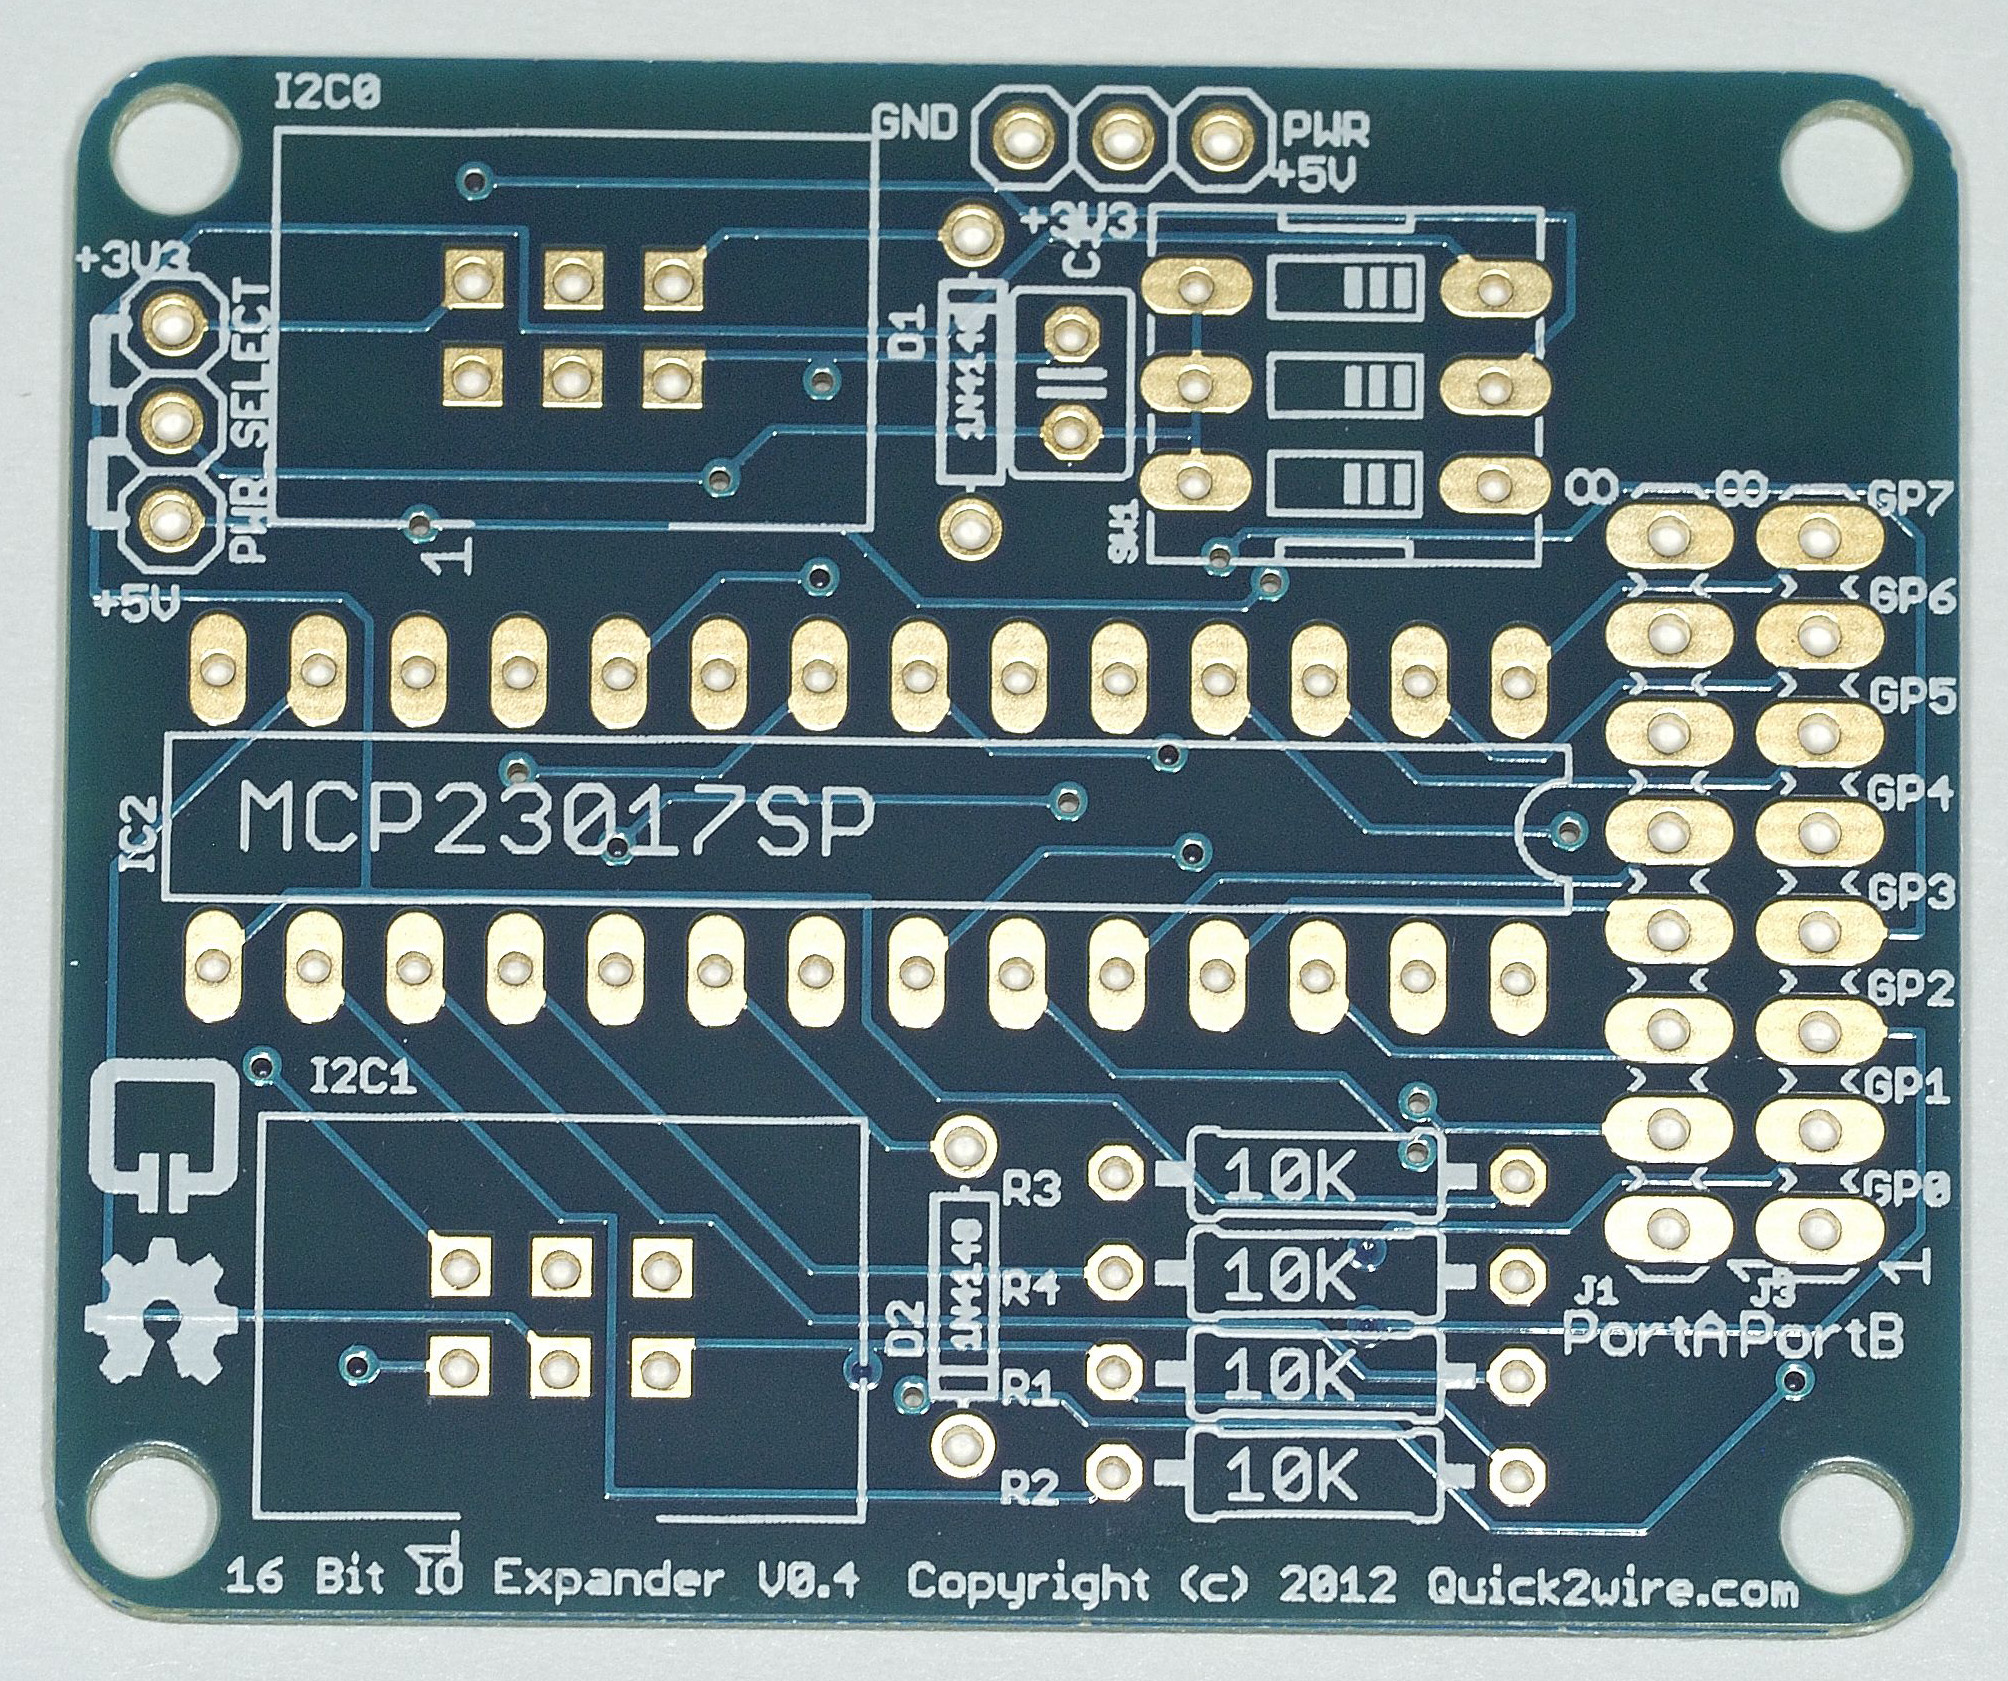 Quick2wire port expander pcb front view